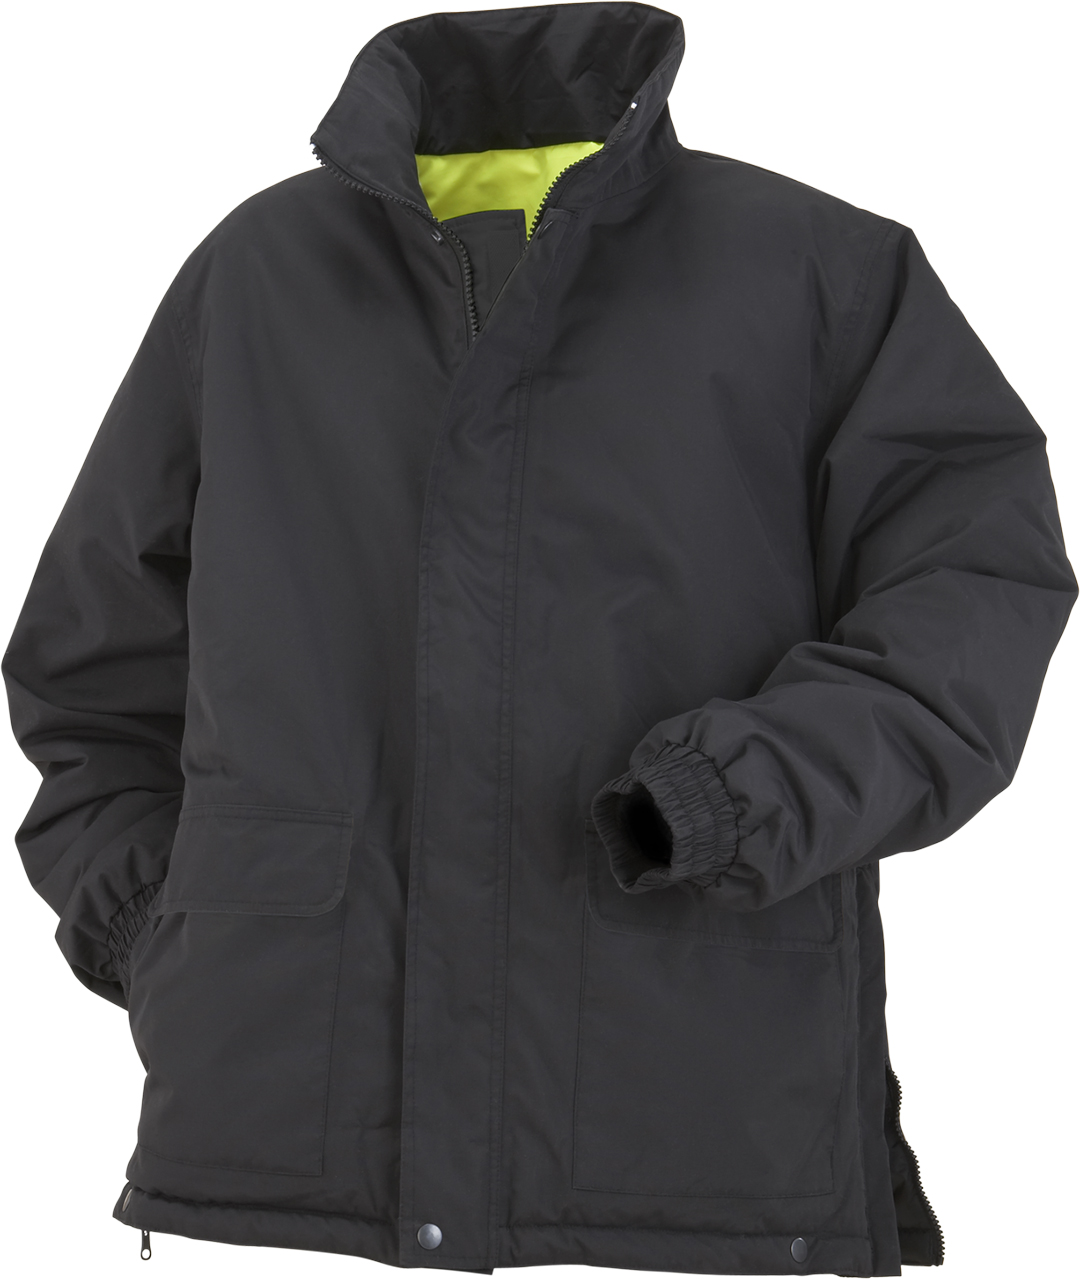 Picture of Sumaggo High Visibility Reversible Winter Jacket